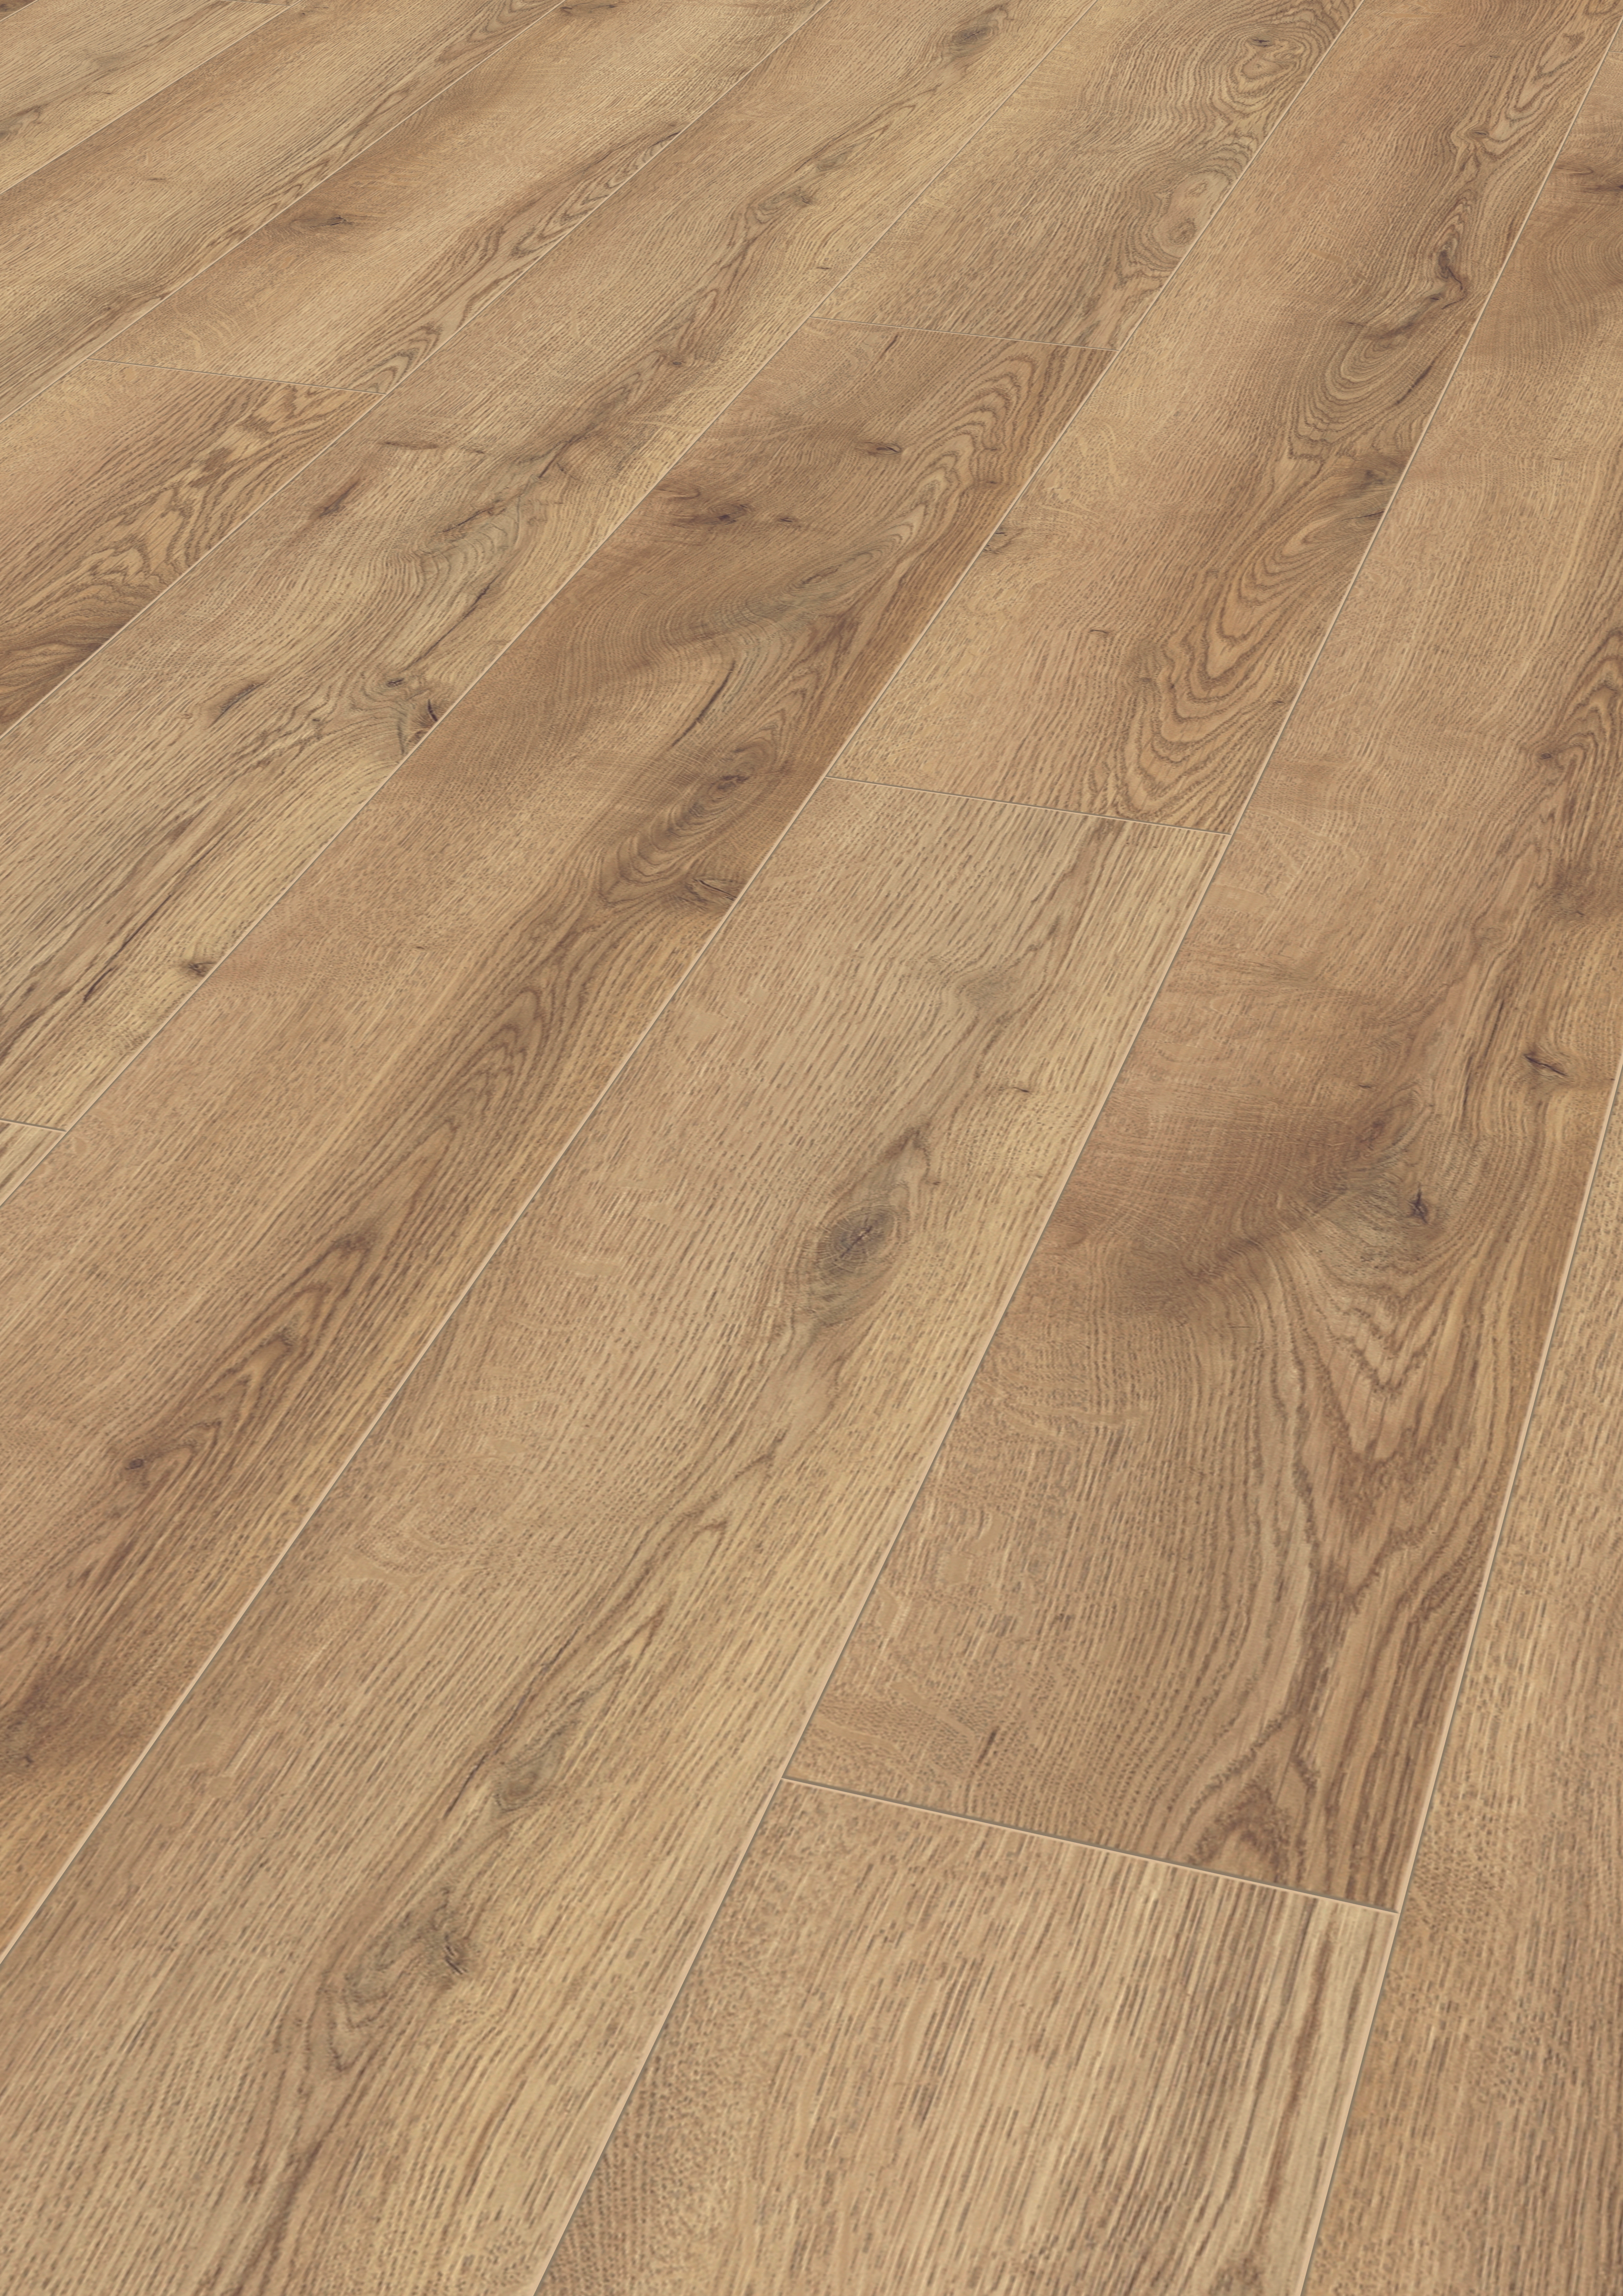 22 Unique Hardwood Flooring Ottawa Reviews 2024 free download hardwood flooring ottawa reviews of mammut laminate flooring in country house plank style kronotex for download picture amp 1